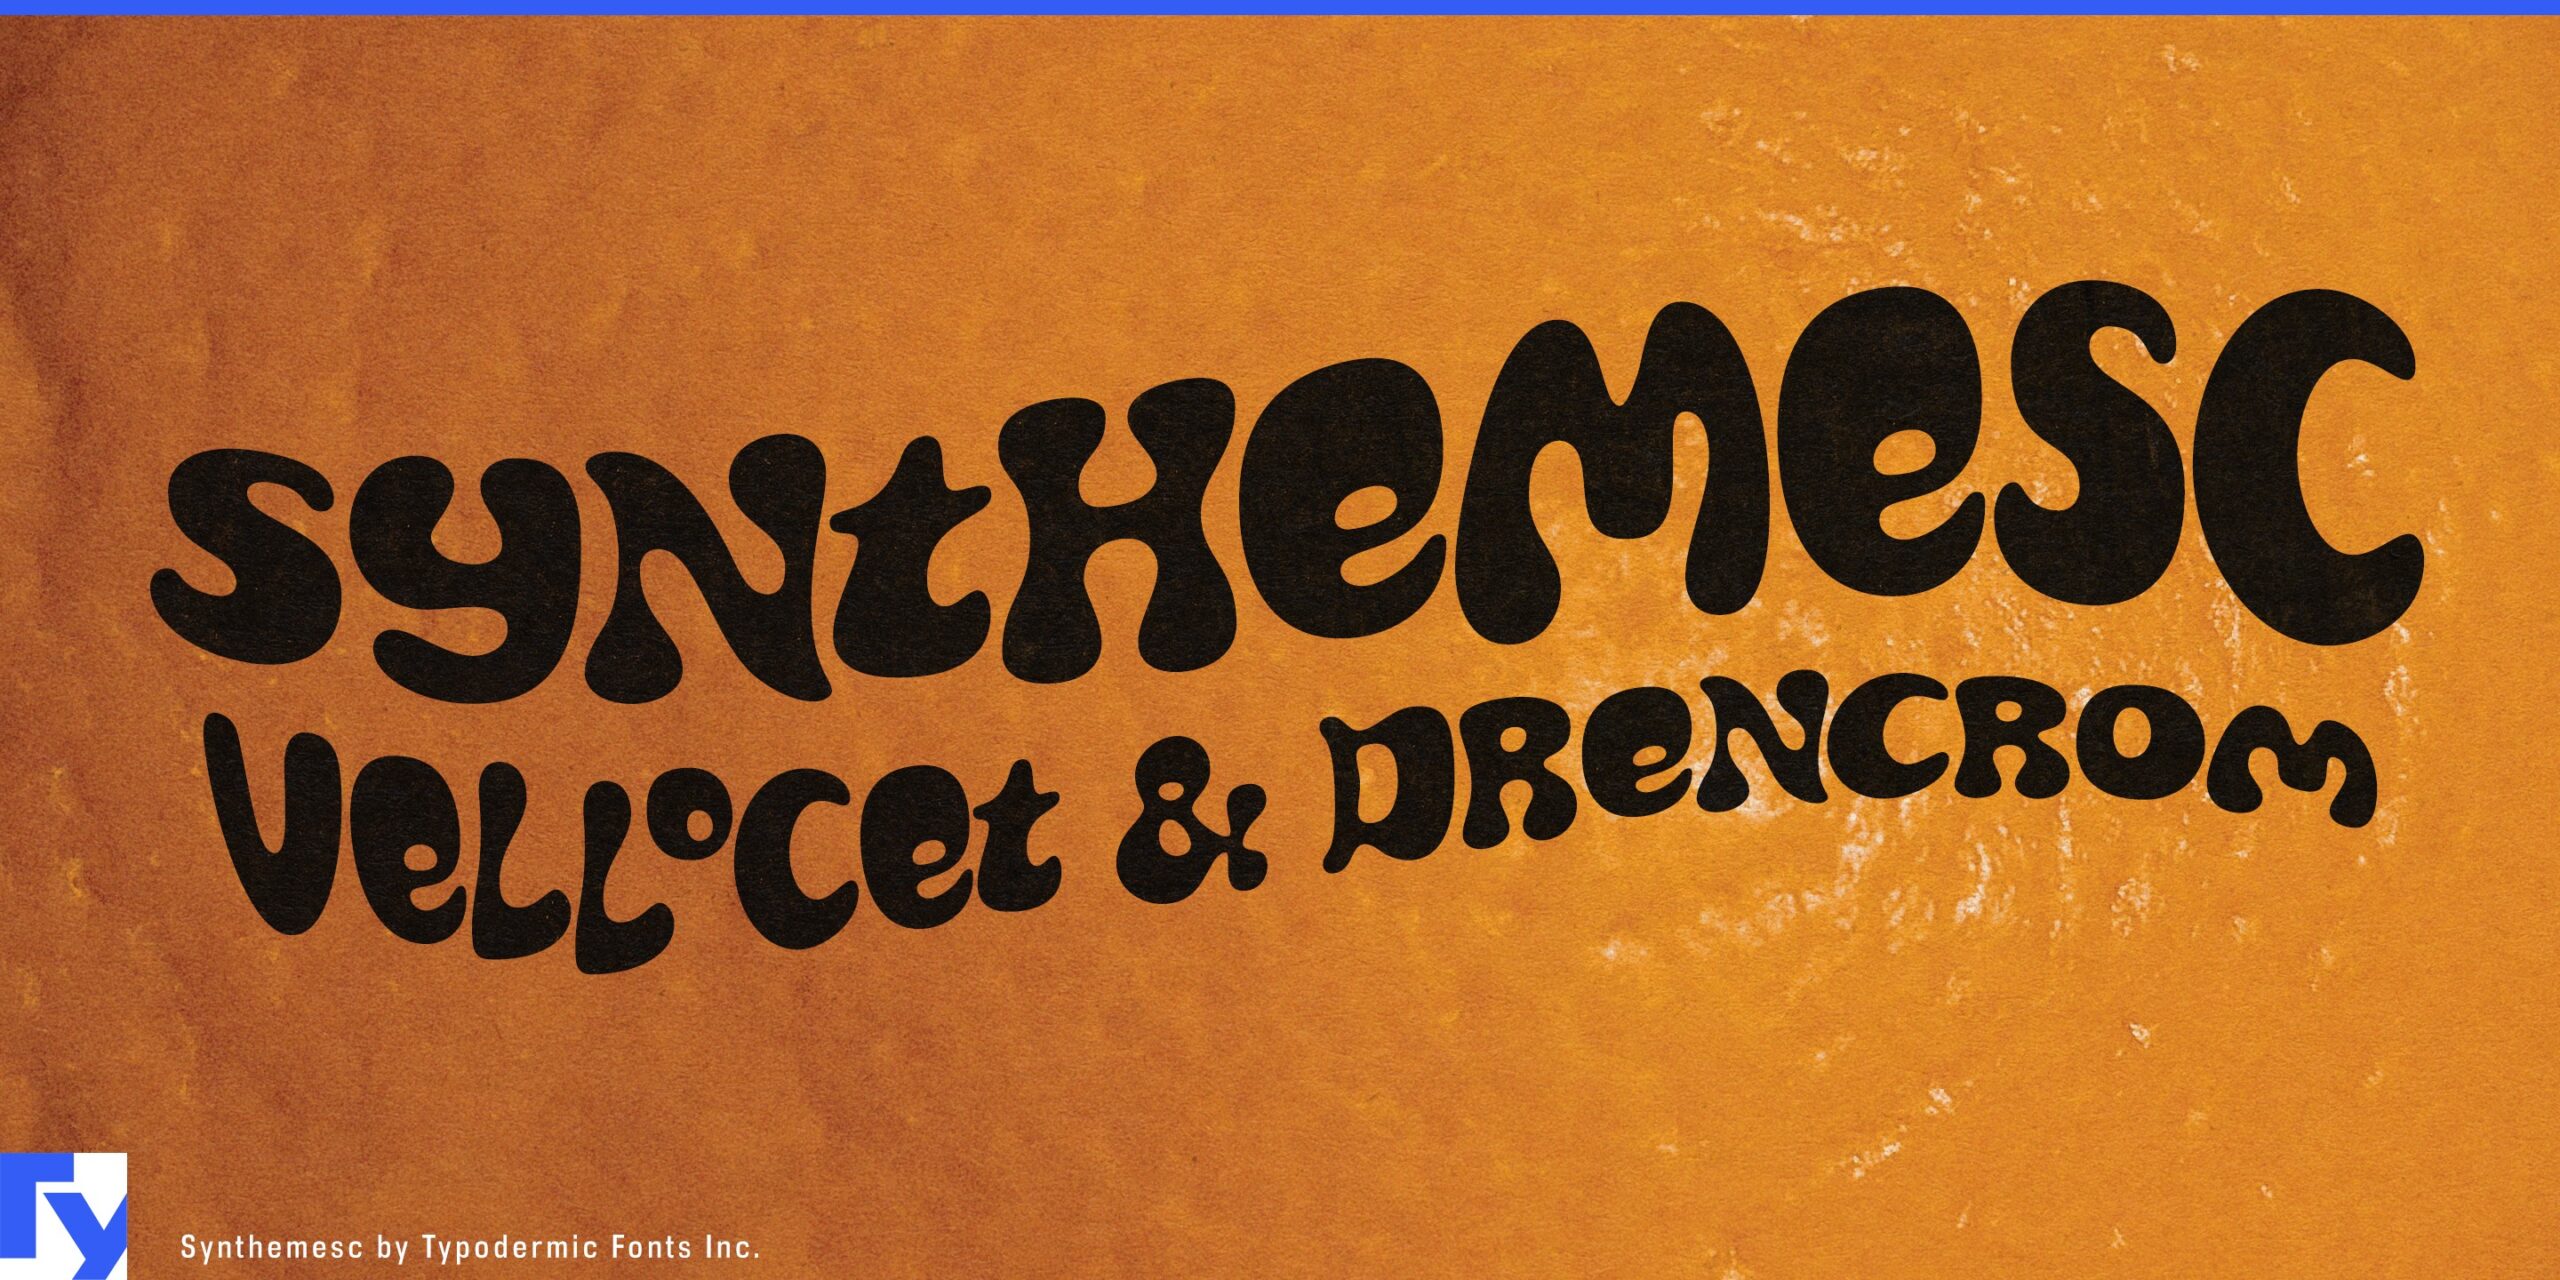 Break the rules and let your creativity shine with this Clockwork Orange-inspired font.